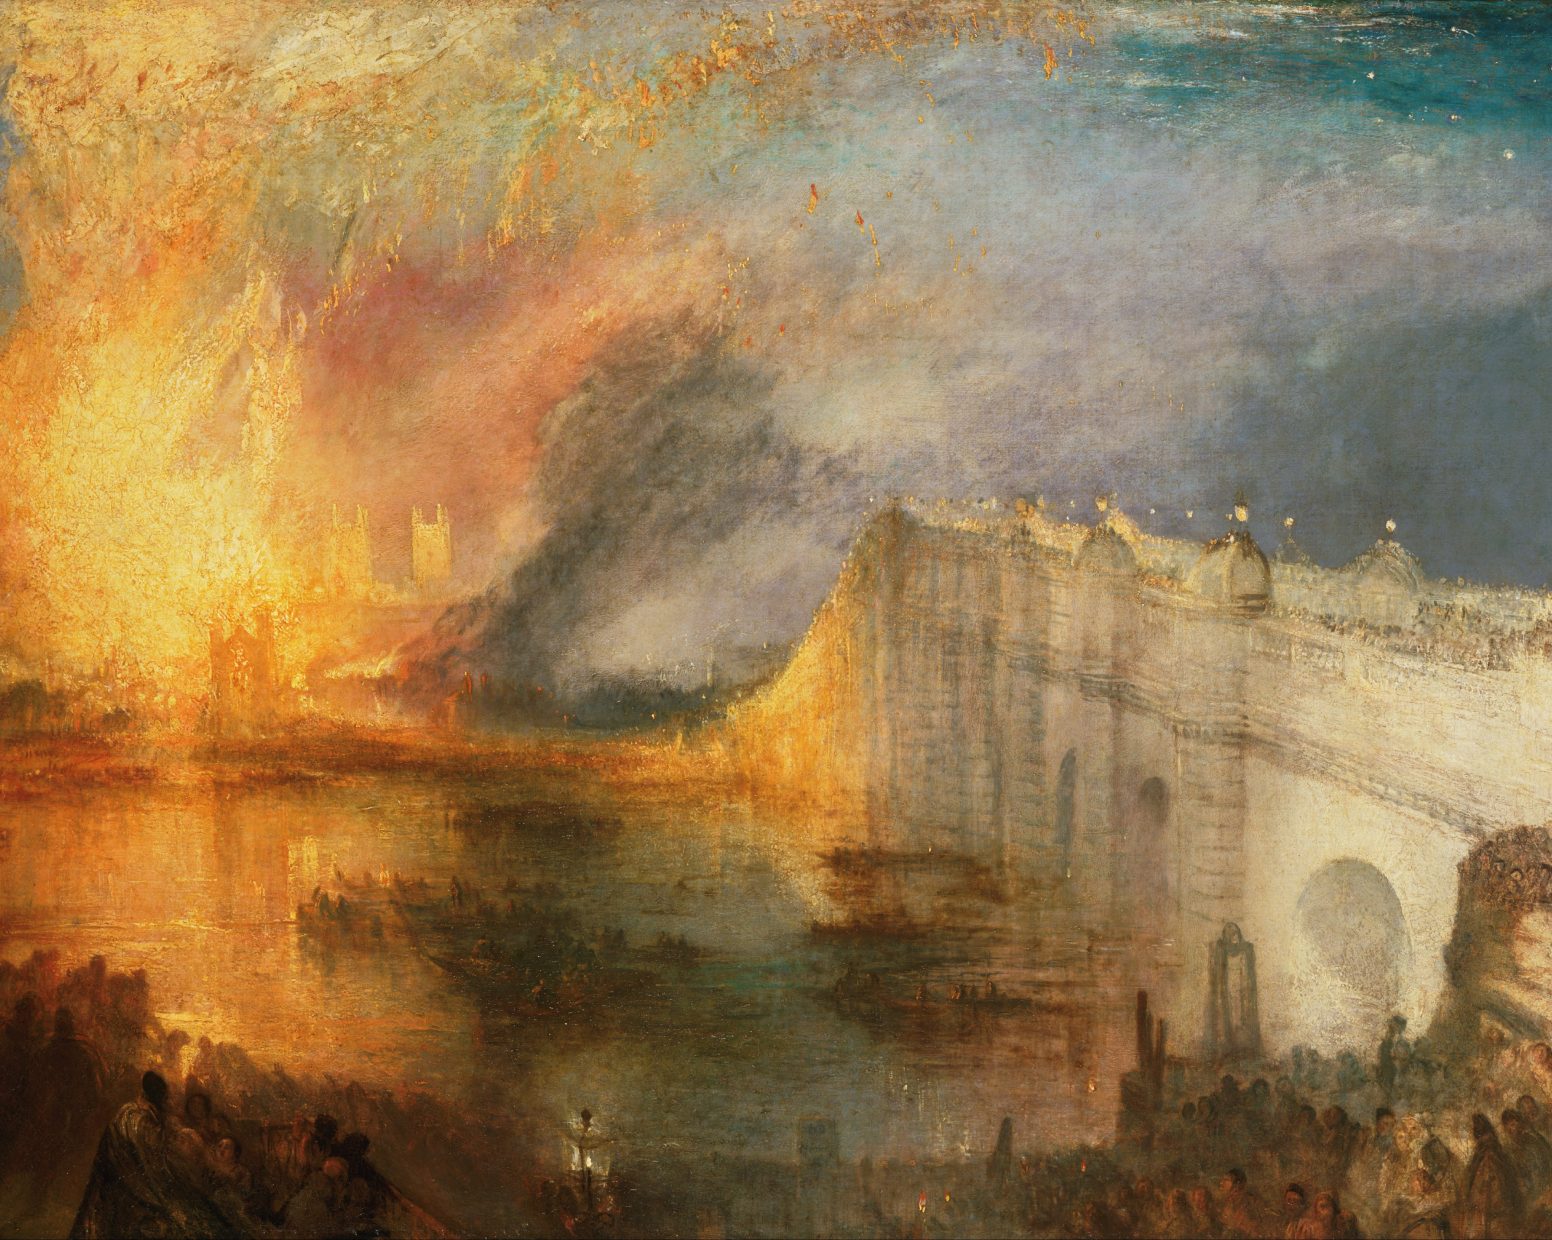 The Burning of the Houses of Parliament by Joseph William Turner